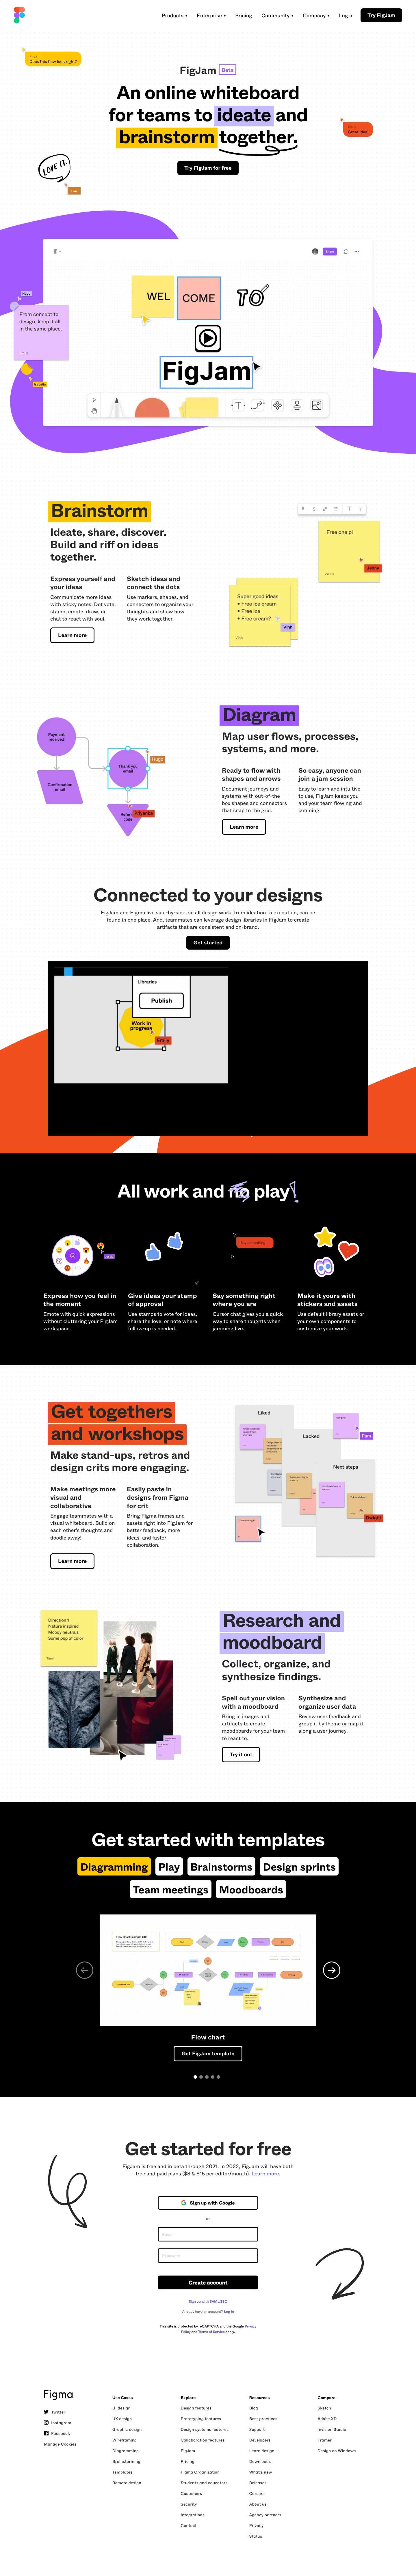 FigJam Landing Page Example: FigJam is an online whiteboard for teams to explore ideas together. Ideate, brainstorm, diagram, moodboard, and more. FigJam is easy to use and collaborative by design.